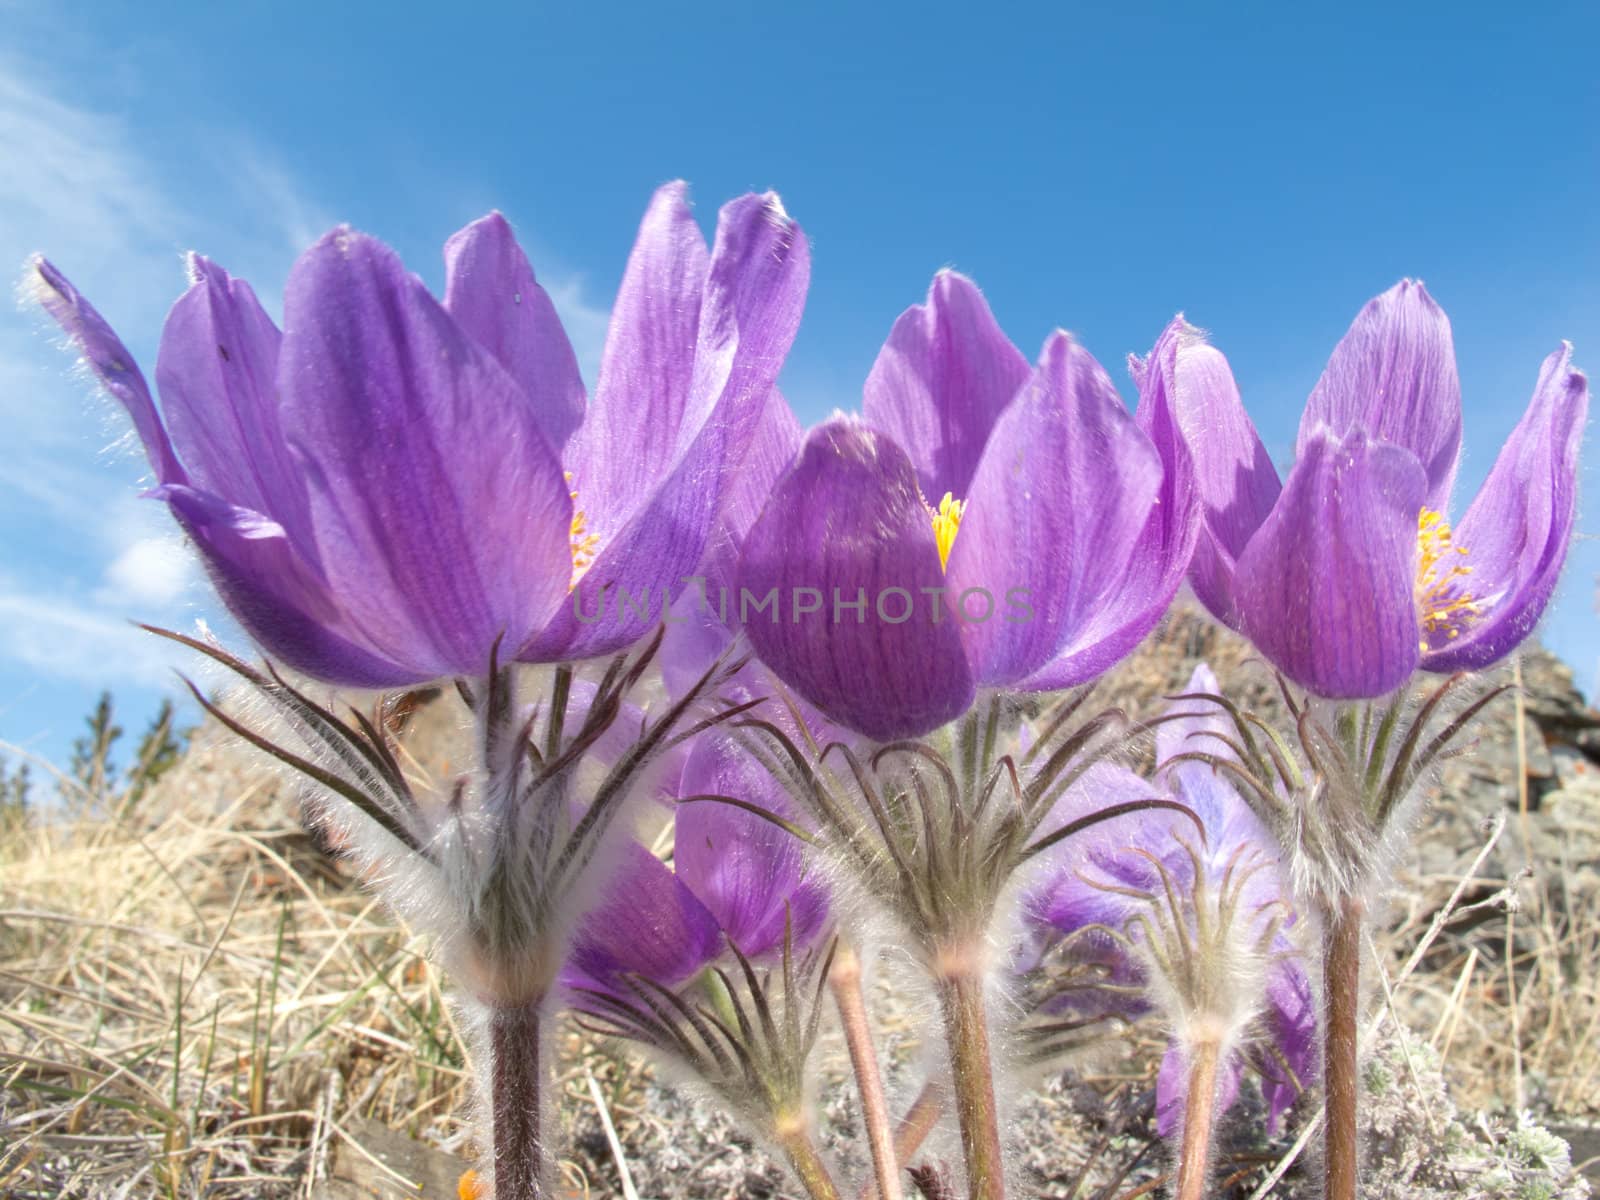 Pasque Flowers close-up in natural environment by PiLens